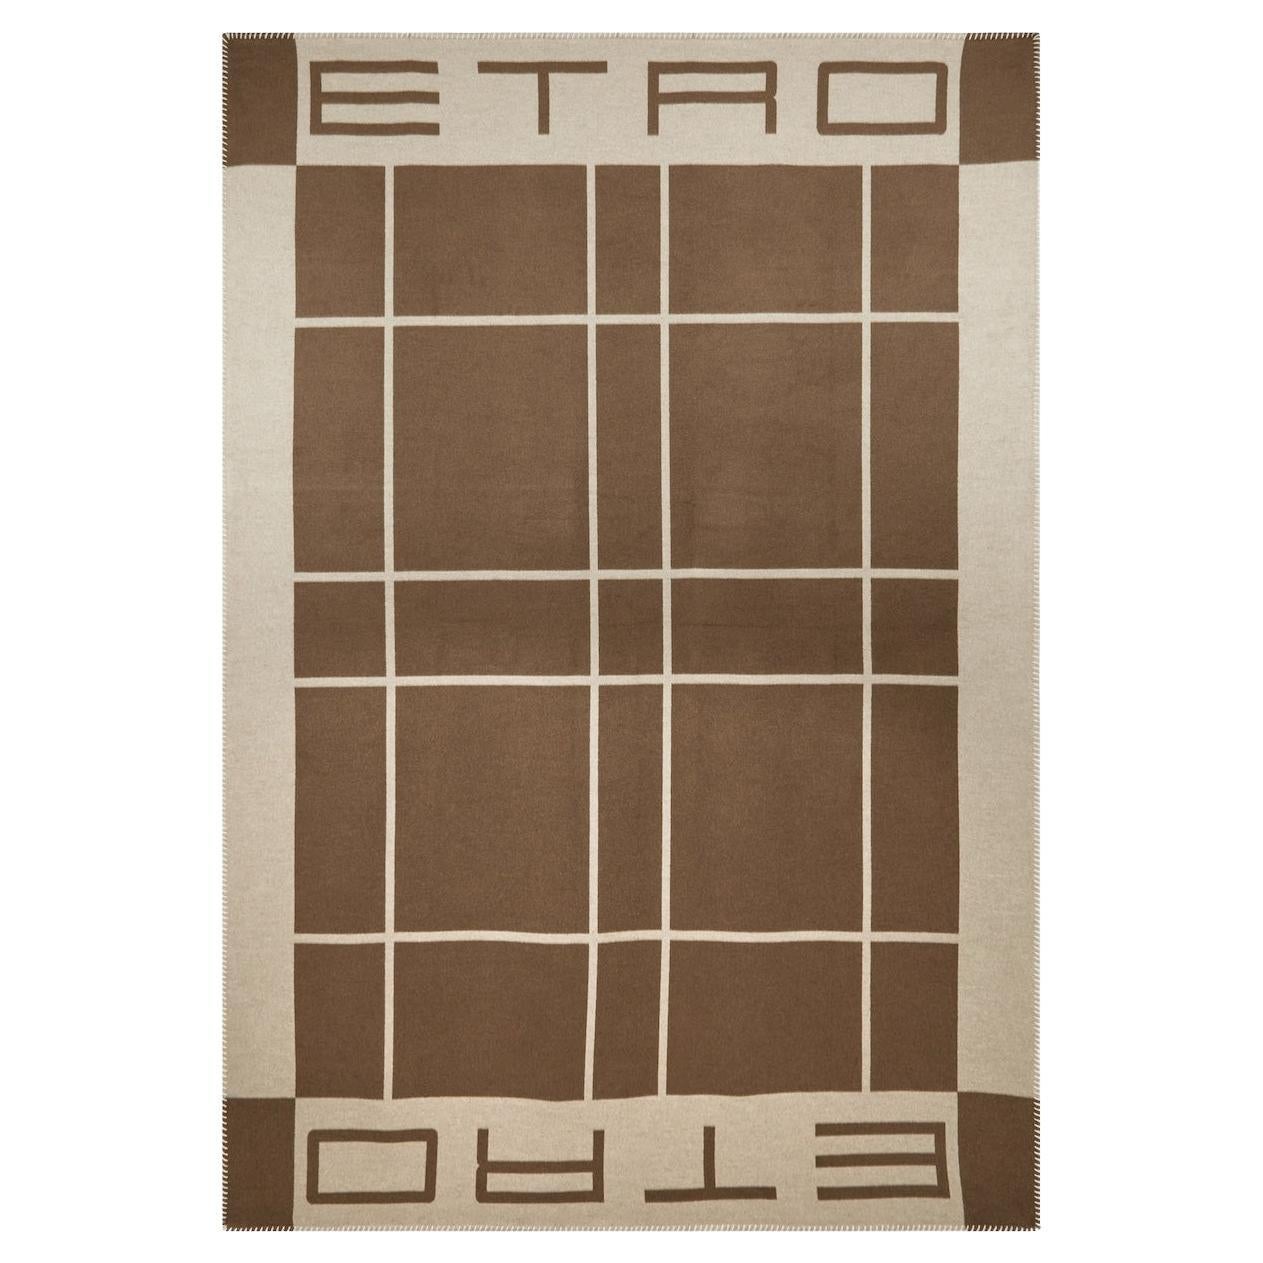 Etro Bani Silk Throw, Chestnut Brown, New in Box, Italy For Sale